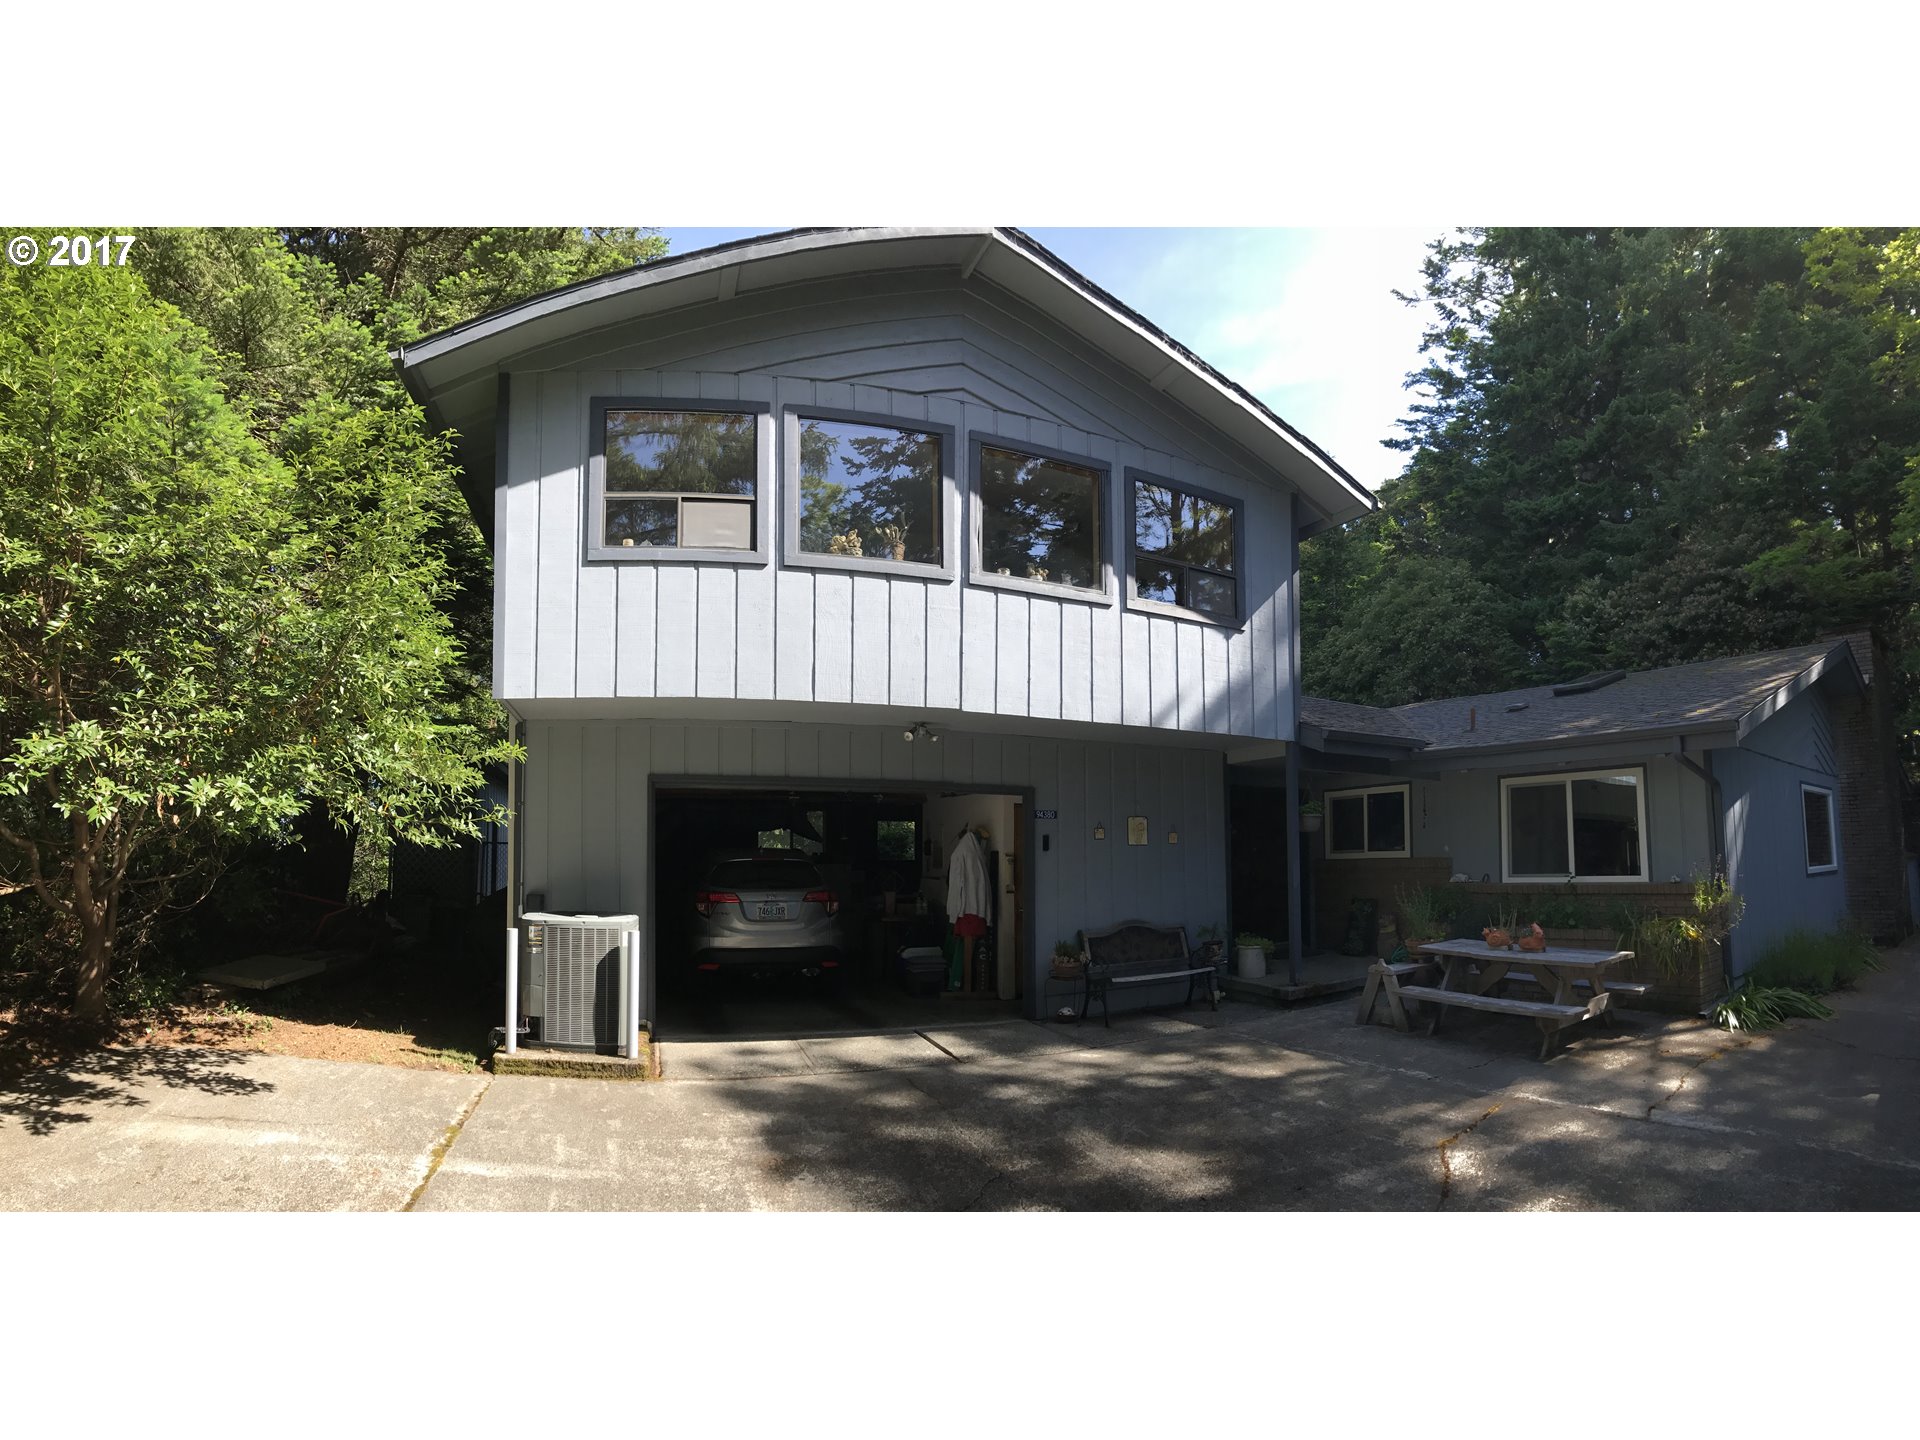 94380 THIRD ST Gold Beach, Brookings Home Listings - Pacific Coastal Real Estate